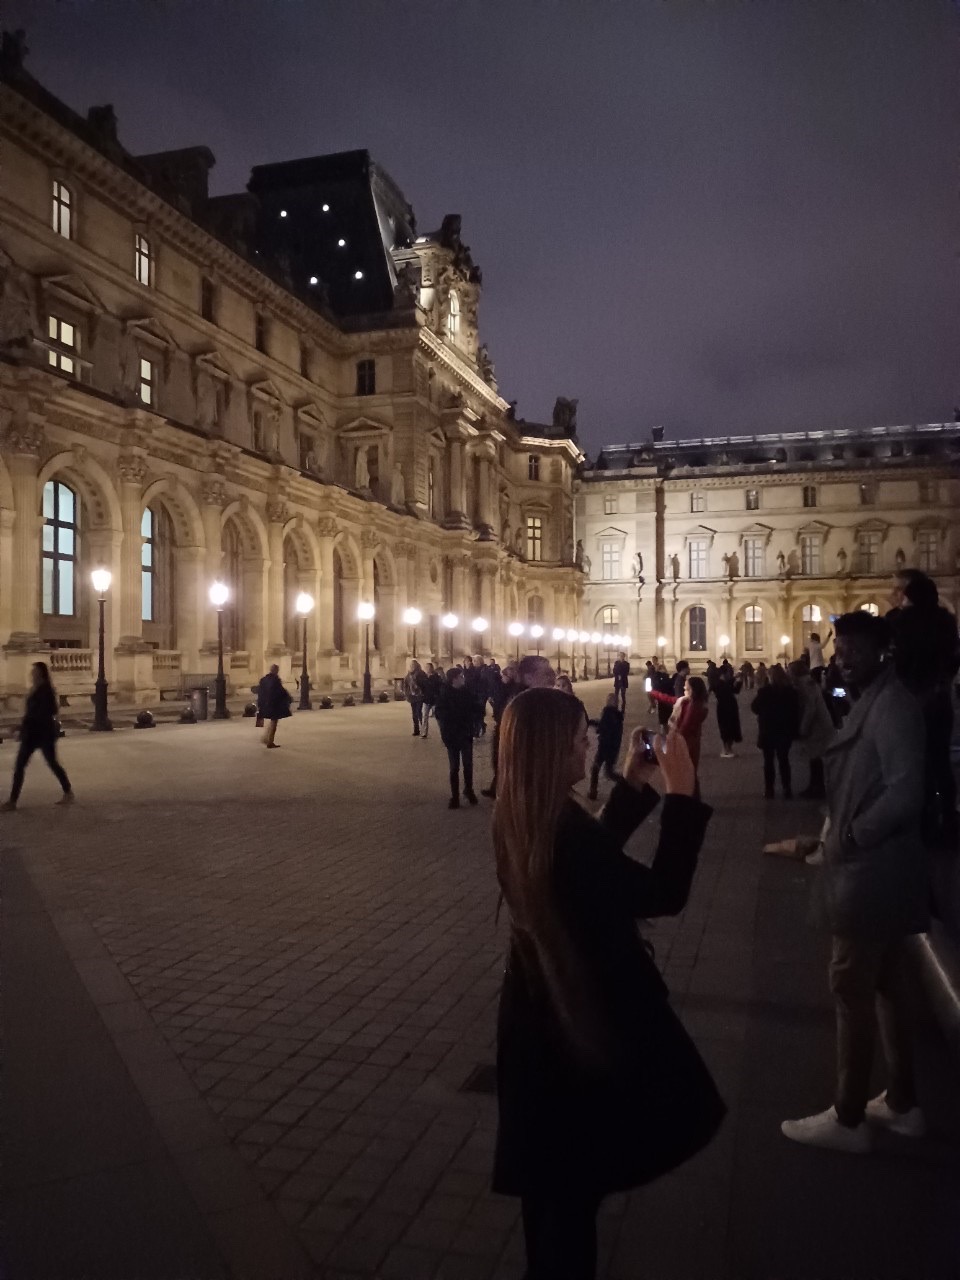 7Night at the Louvre Museum_2